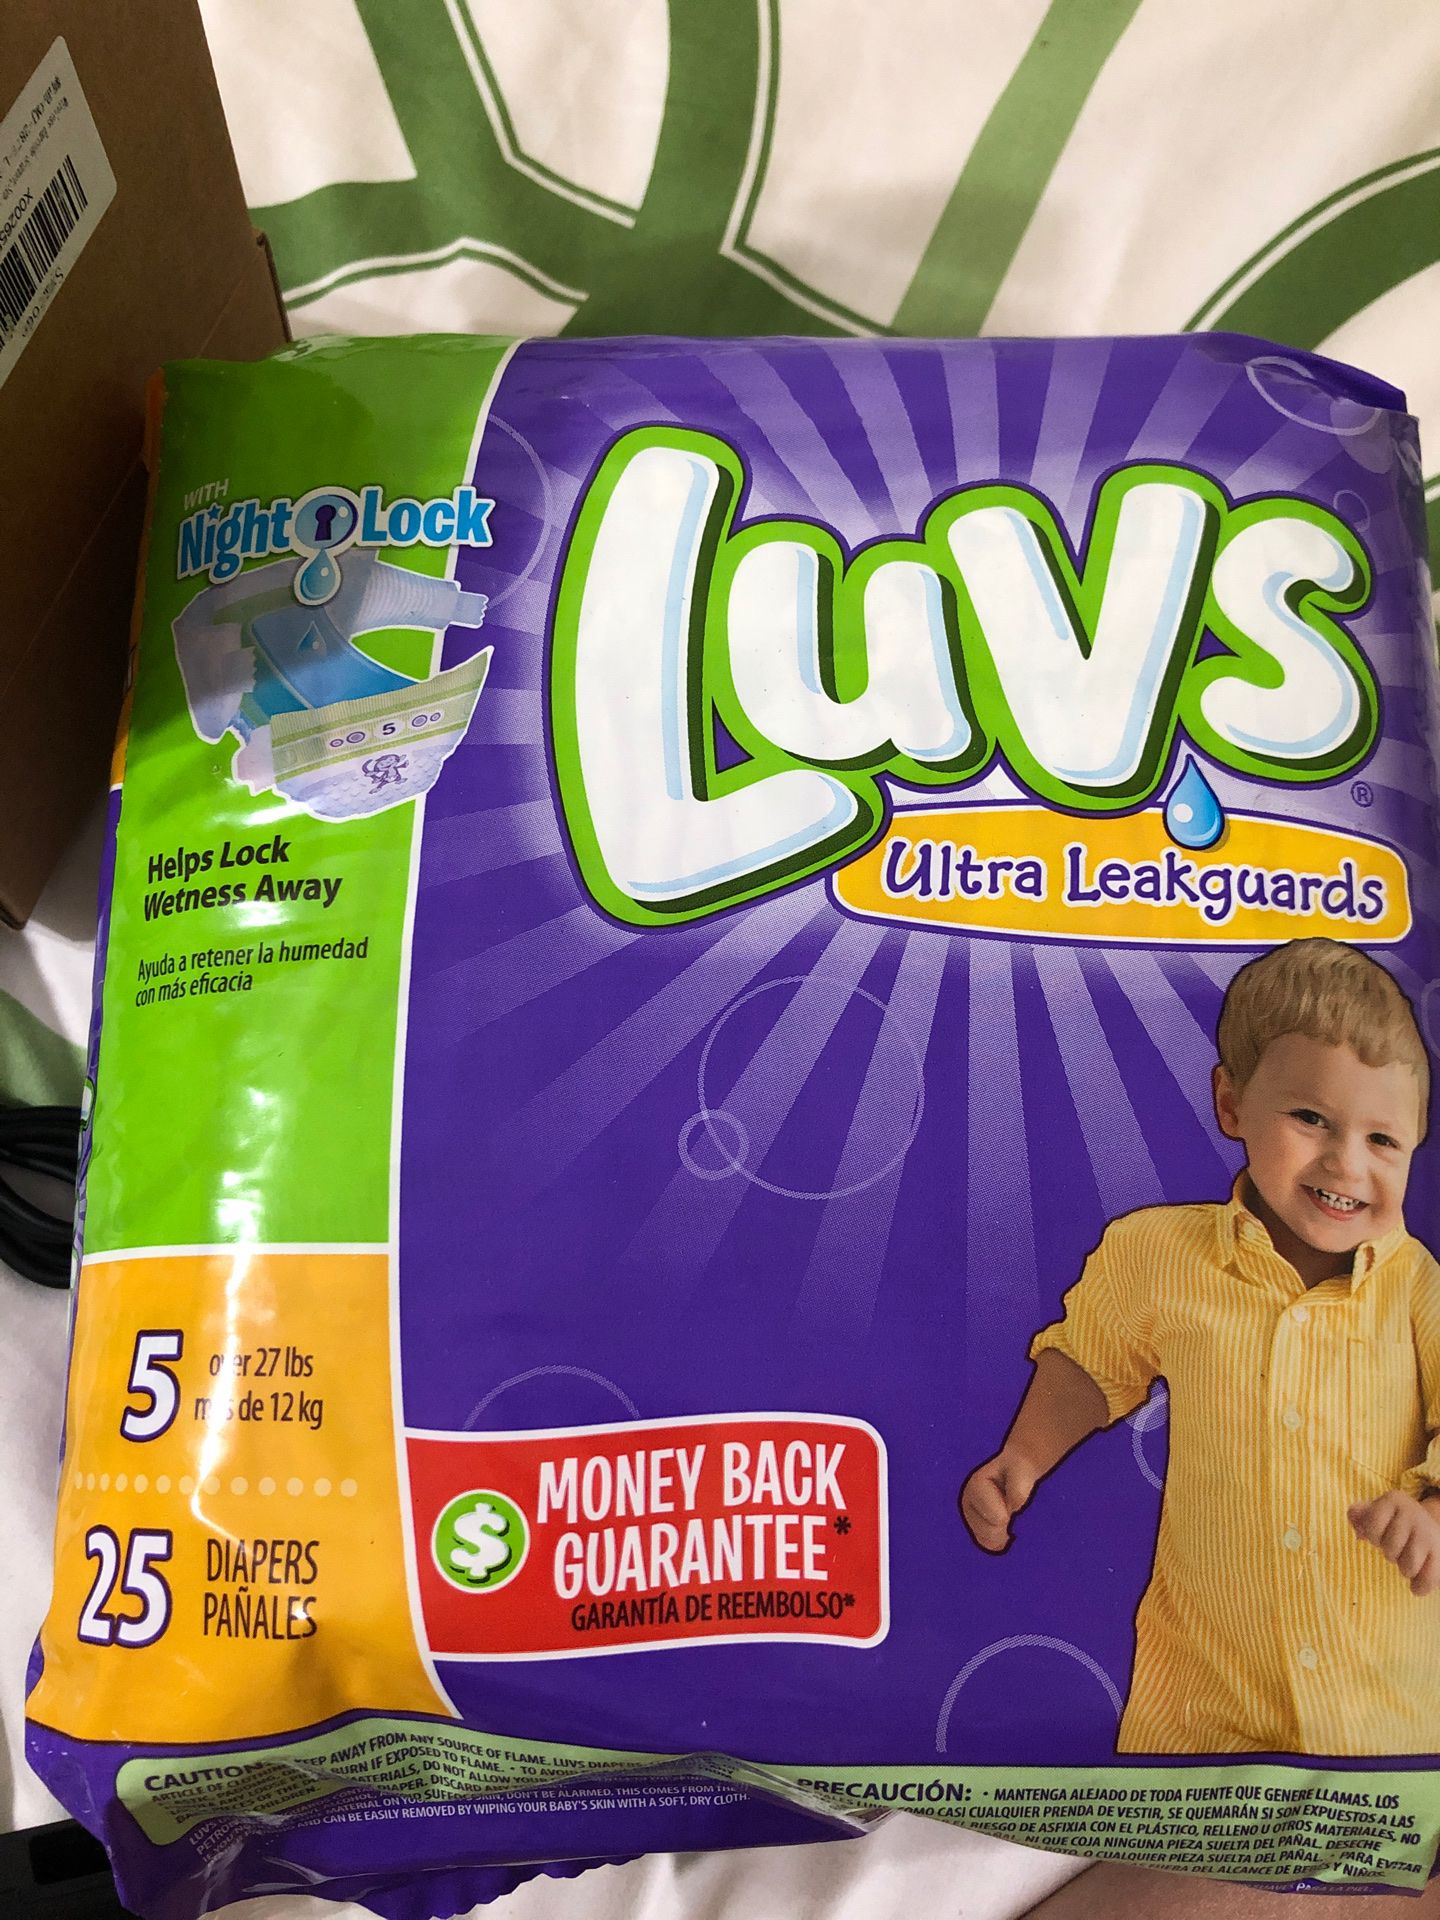 Brand new LuVs diapers